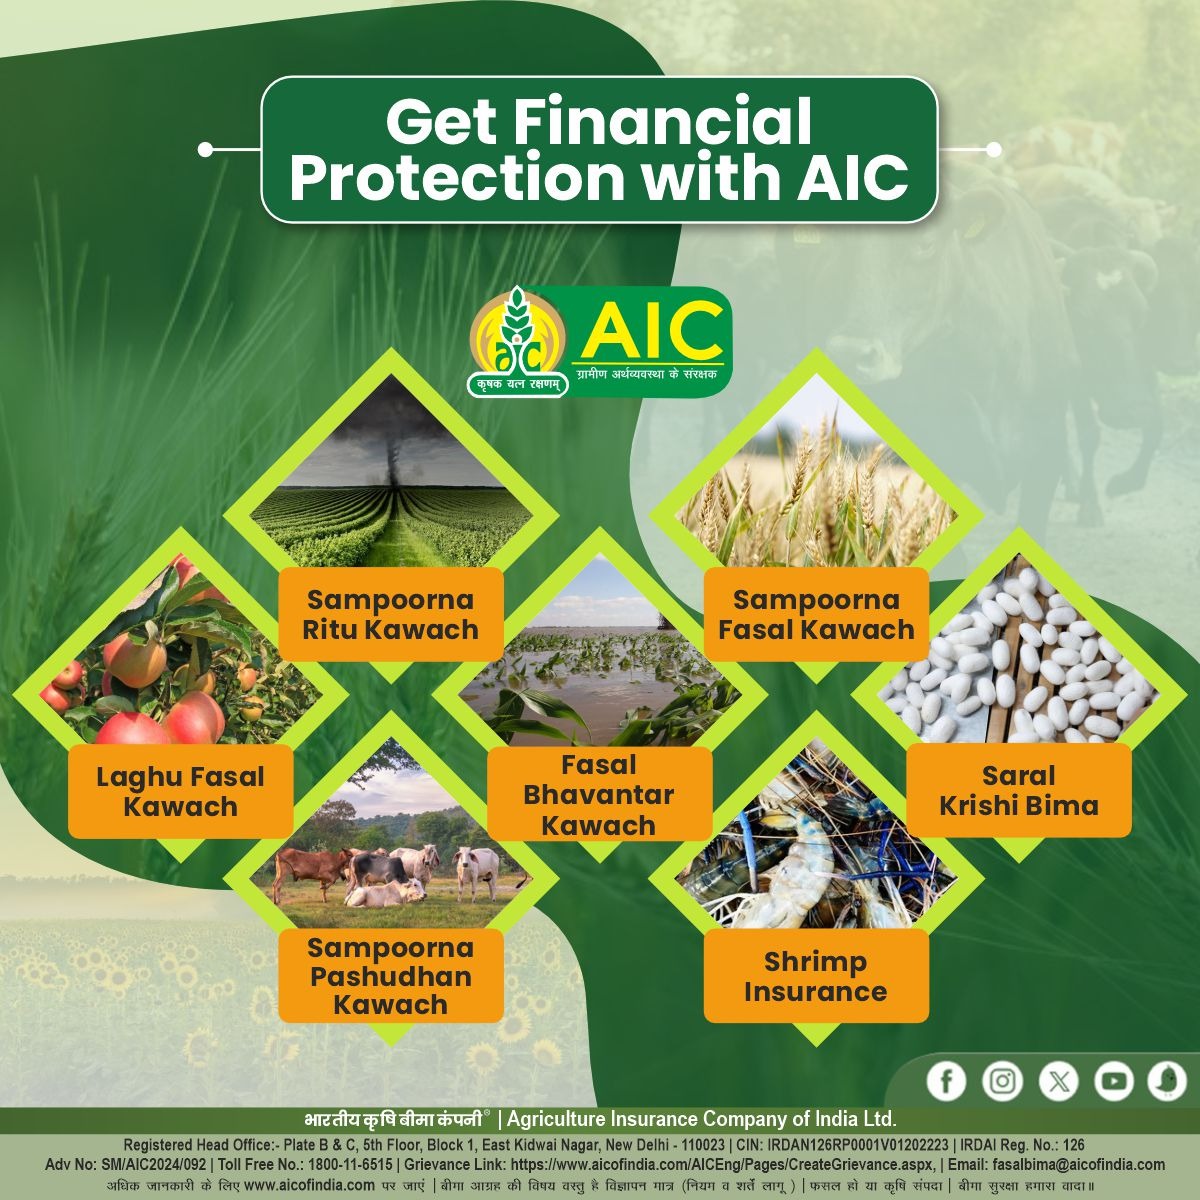 Insure your agricultural and related activities with AIC and get financial protection from risks and natural calamities. For more information, visit aicofindia.com or contact at Toll-Free Number 1800-116-515. #AIC #ग्रामीणअर्थव्यवस्थाकेसंरक्षक #agriculture #insurance…